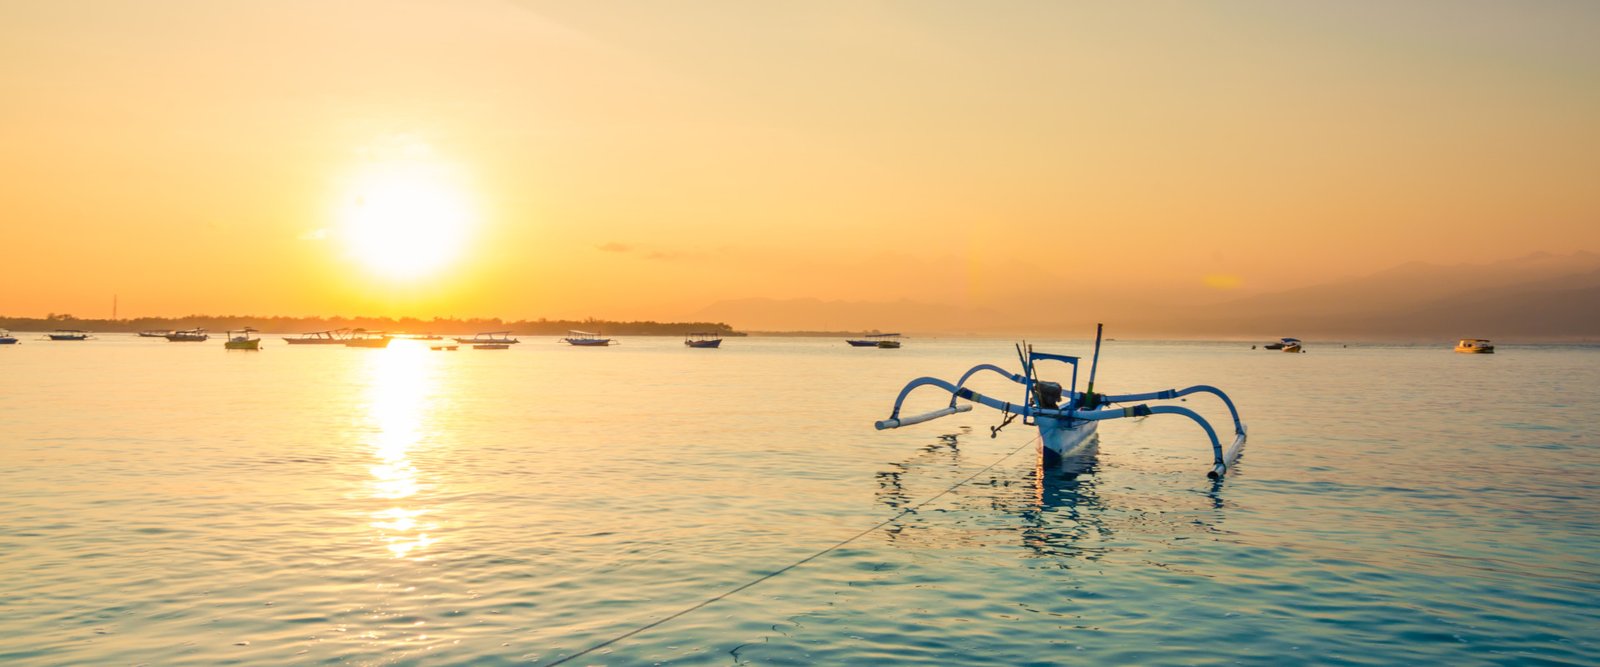 This picture a traditional Indonesian fishing boat. The picture is featured by your Gili Meno dive center Divine Divers. Diving Gili Islands for beginners and experts. Fun Diving and courses and introduction dives. Accommodation and healthy restaurant on Gili Meno.